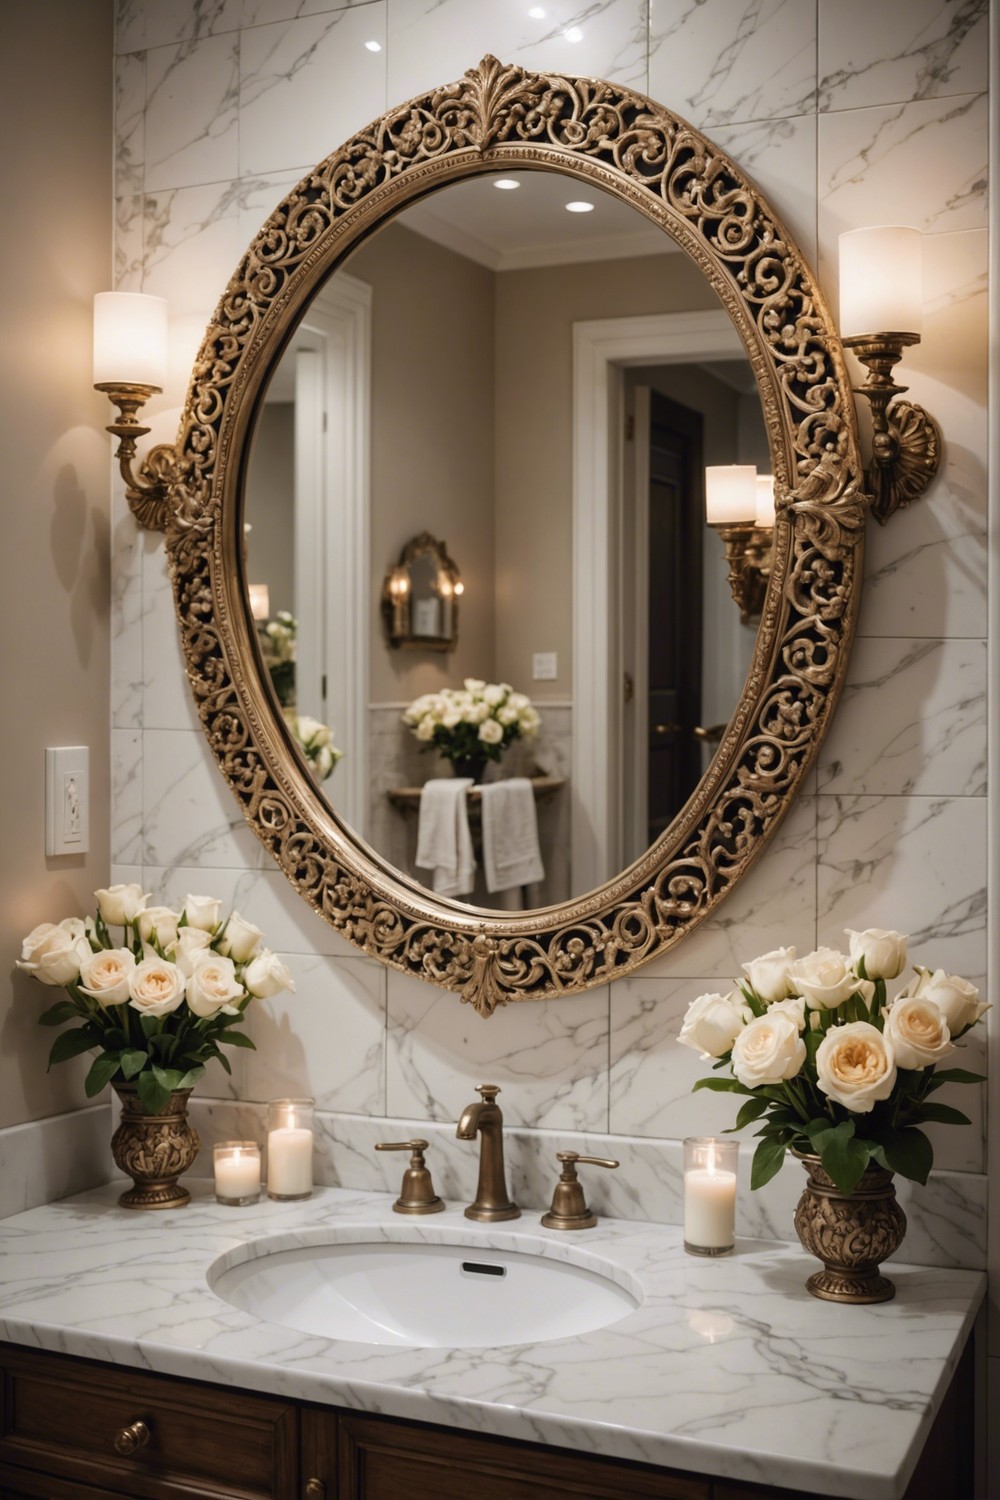 Circular Mirrors with Intricate Frames